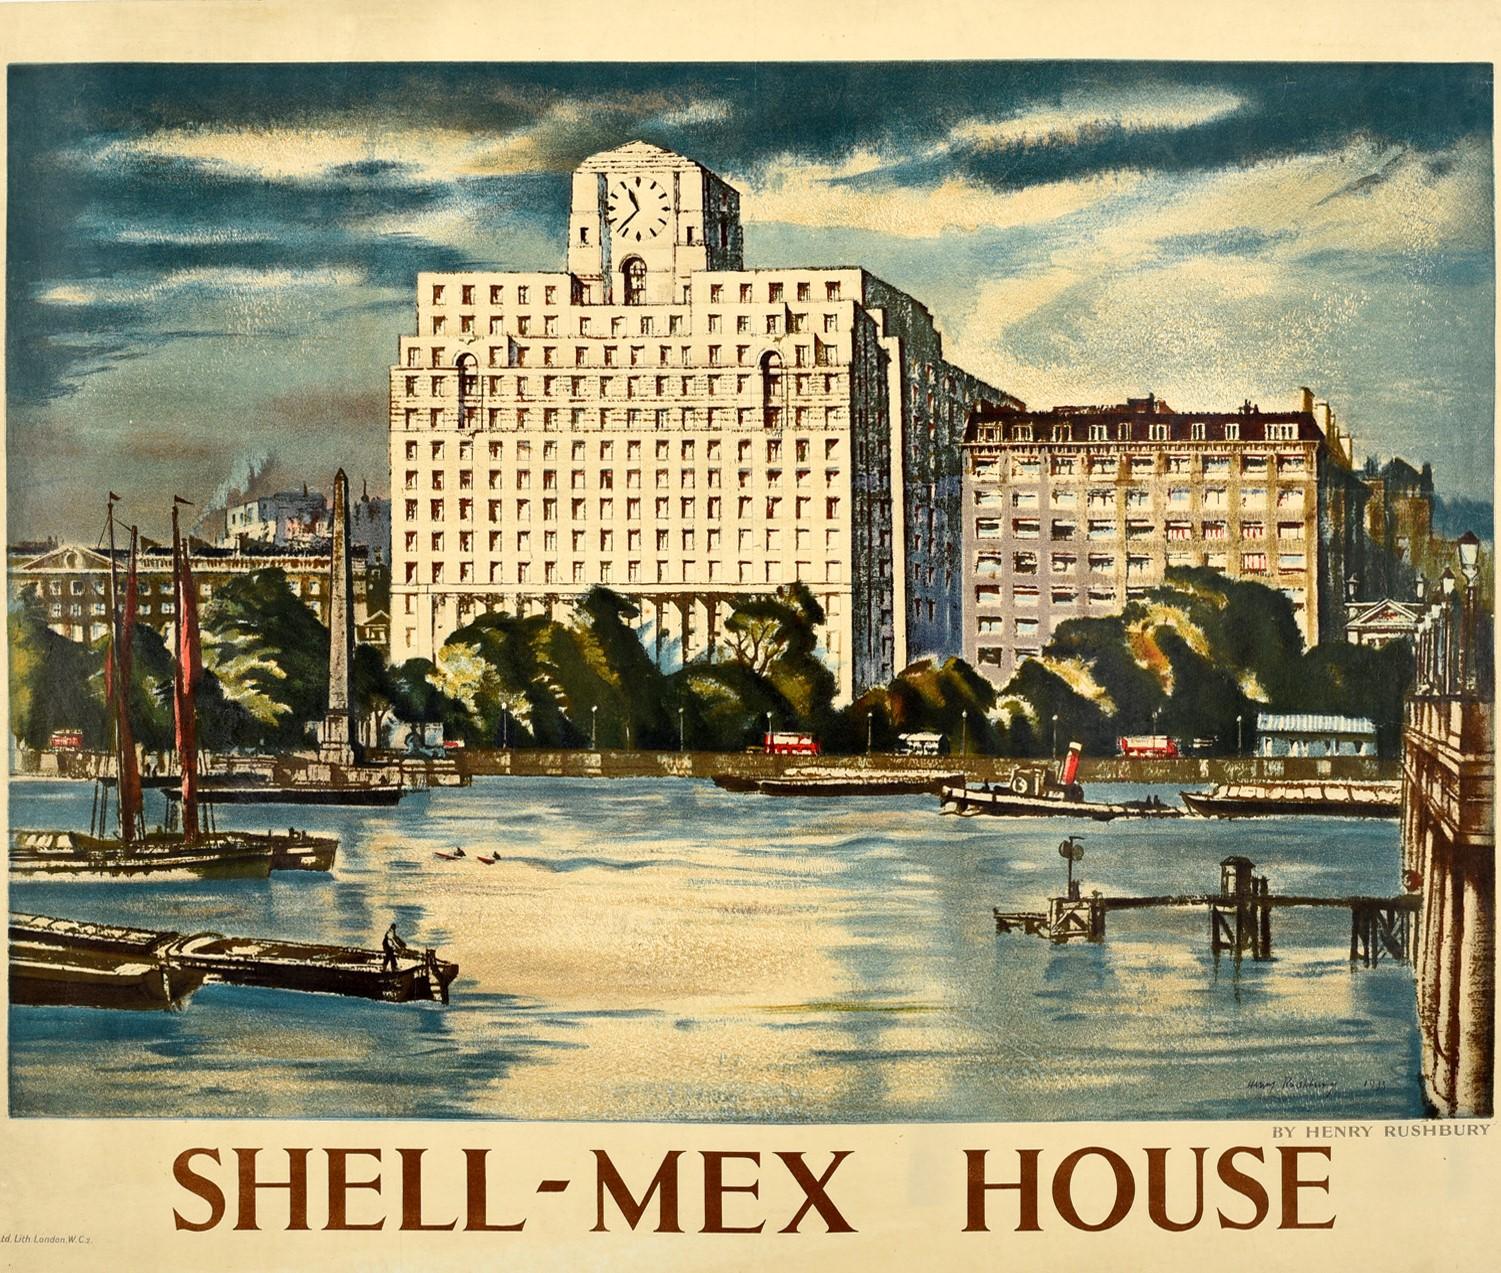 Original Vintage Poster Painting Of Shell-Mex House River Thames London BP Shell - Print by Henry Rushbury